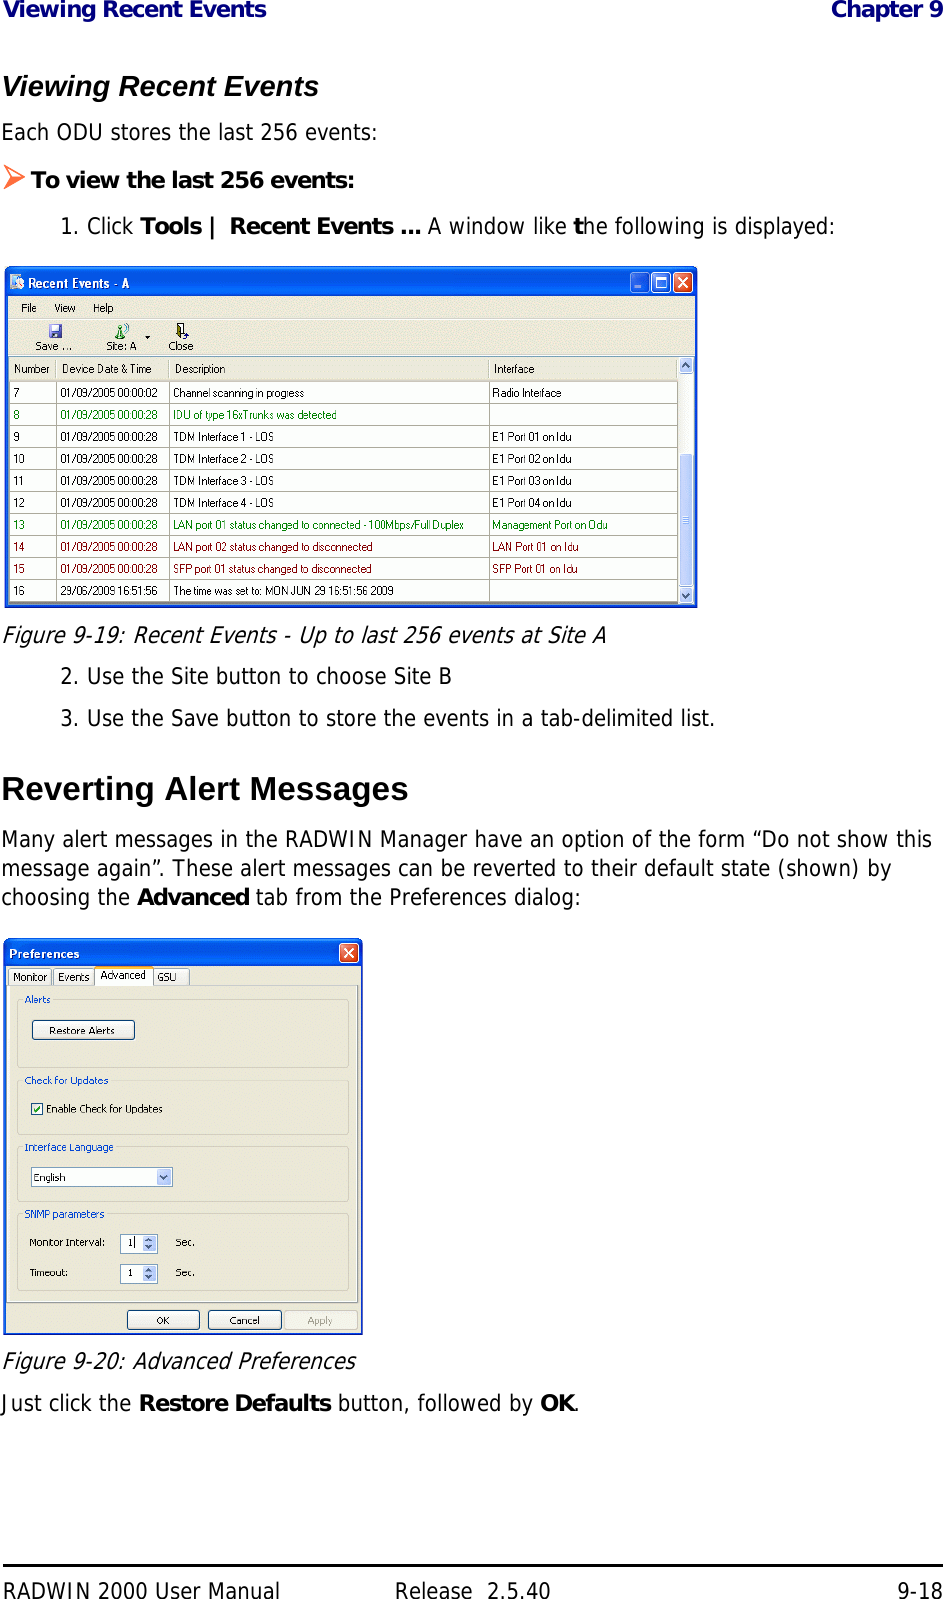 Viewing Recent Events Chapter 9RADWIN 2000 User Manual Release  2.5.40 9-18Viewing Recent EventsEach ODU stores the last 256 events:To view the last 256 events:1. Click Tools | Recent Events ... A window like the following is displayed:Figure 9-19: Recent Events - Up to last 256 events at Site A2. Use the Site button to choose Site B3. Use the Save button to store the events in a tab-delimited list.Reverting Alert MessagesMany alert messages in the RADWIN Manager have an option of the form “Do not show this message again”. These alert messages can be reverted to their default state (shown) by choosing the Advanced tab from the Preferences dialog:Figure 9-20: Advanced PreferencesJust click the Restore Defaults button, followed by OK.